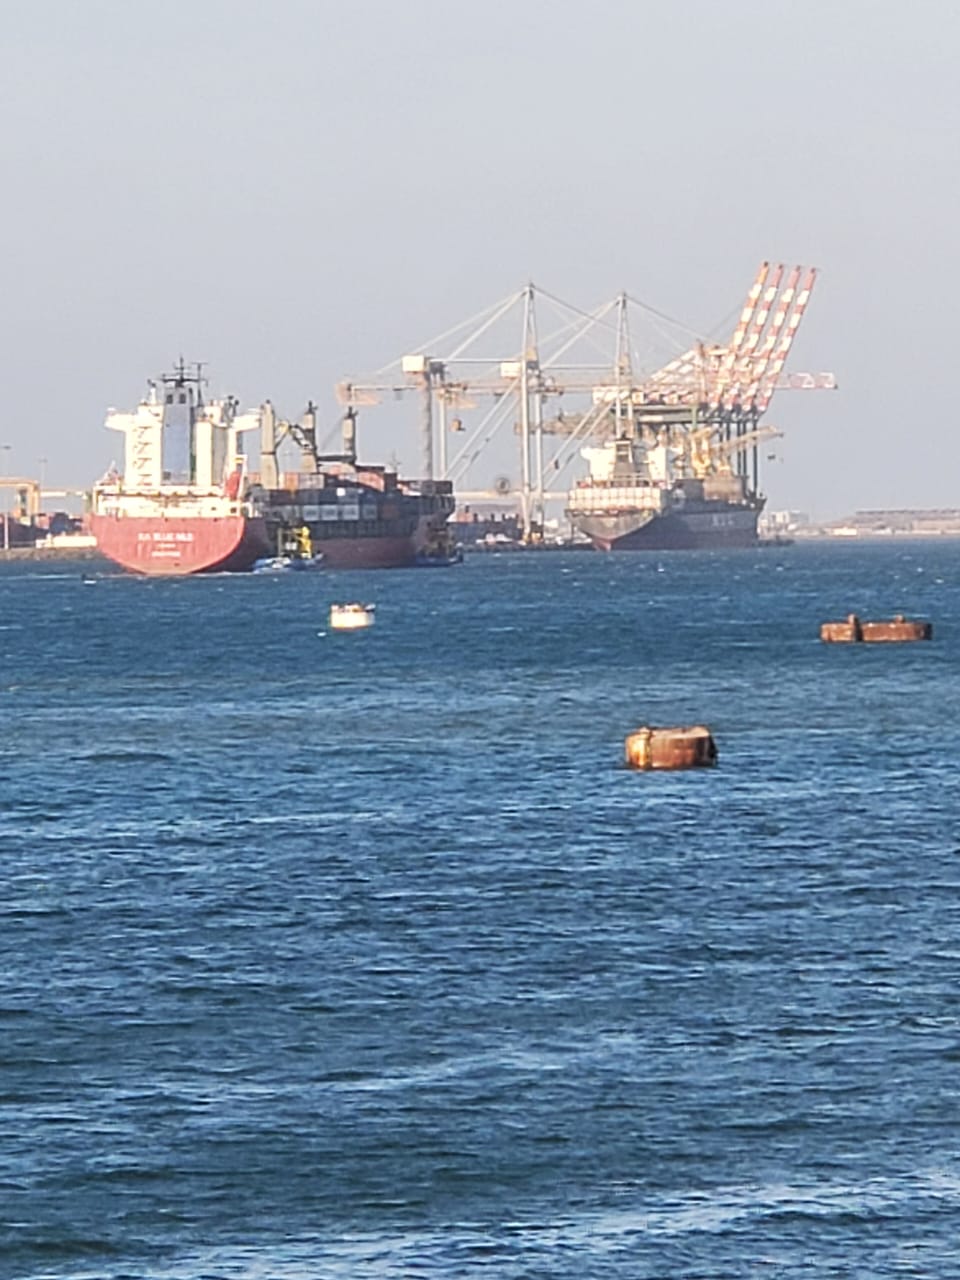 Container Vessel M/V EA Blue Nile Enters the port on arrival